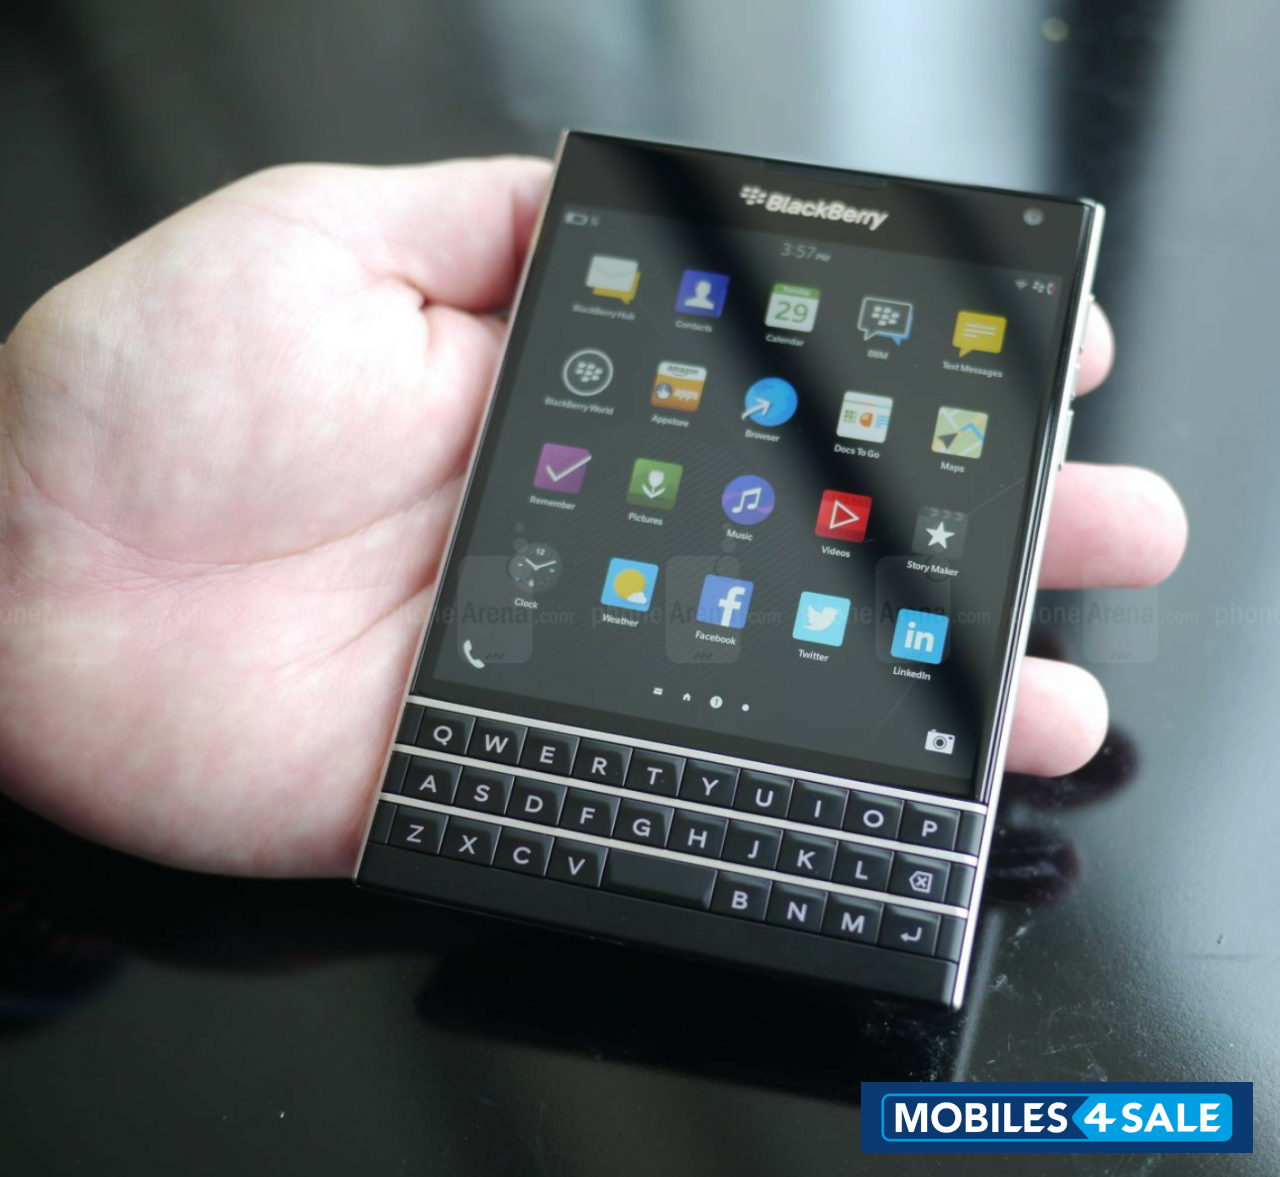 Used 2017 BlackBerry blackberry passport for sale in Imphal West. ID is ...